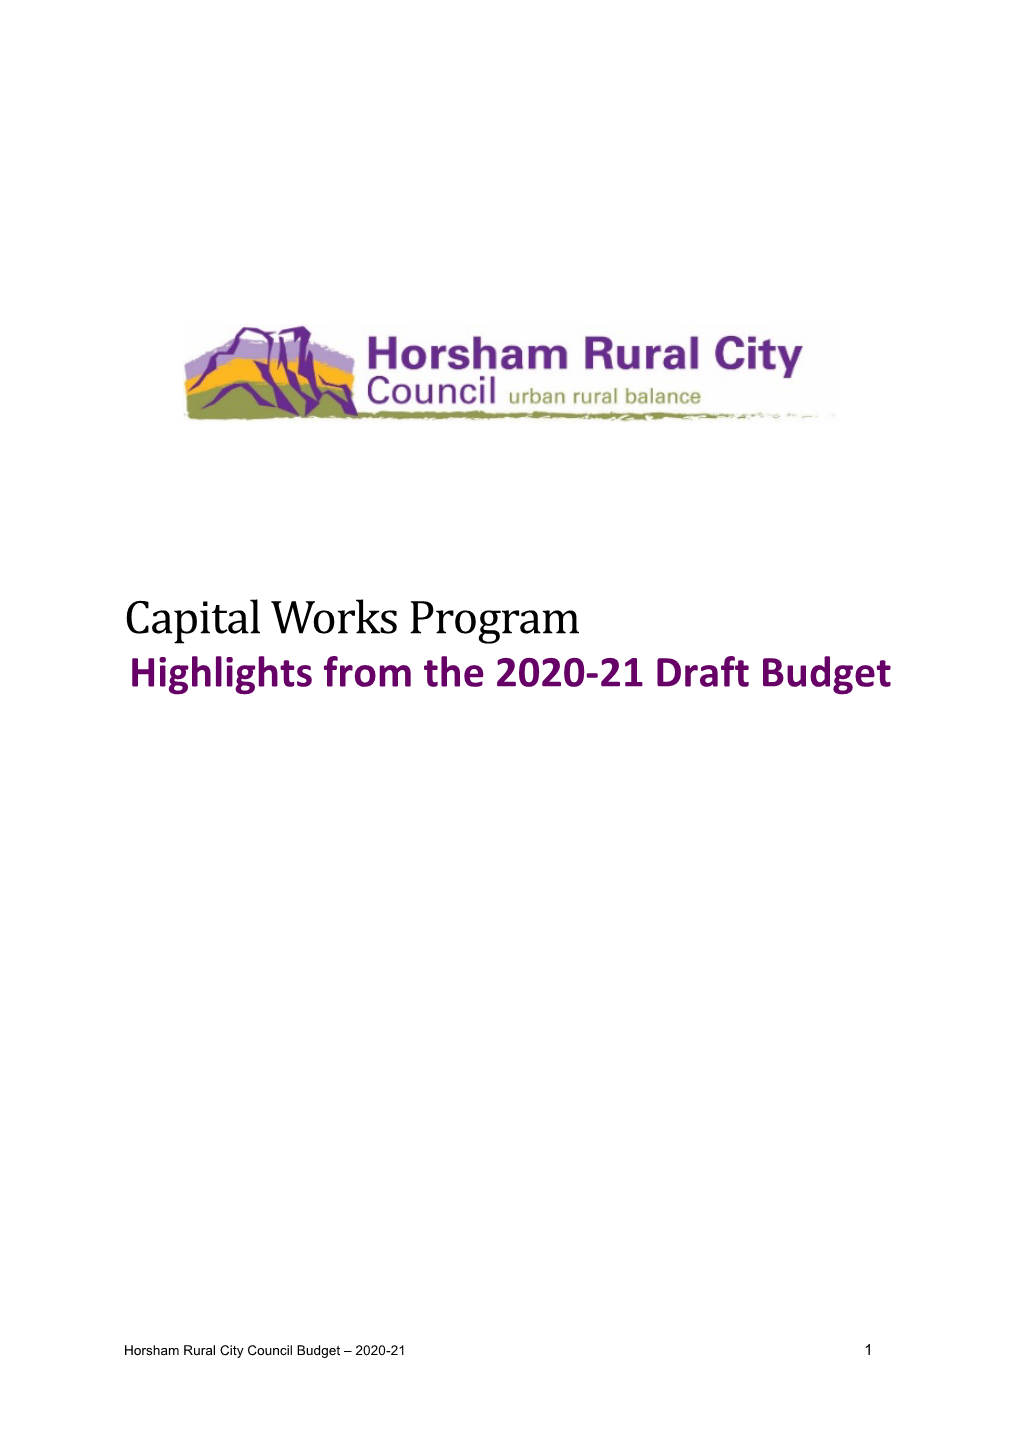 Capital Works Program Highlights from the 2020-21 Draft Budget